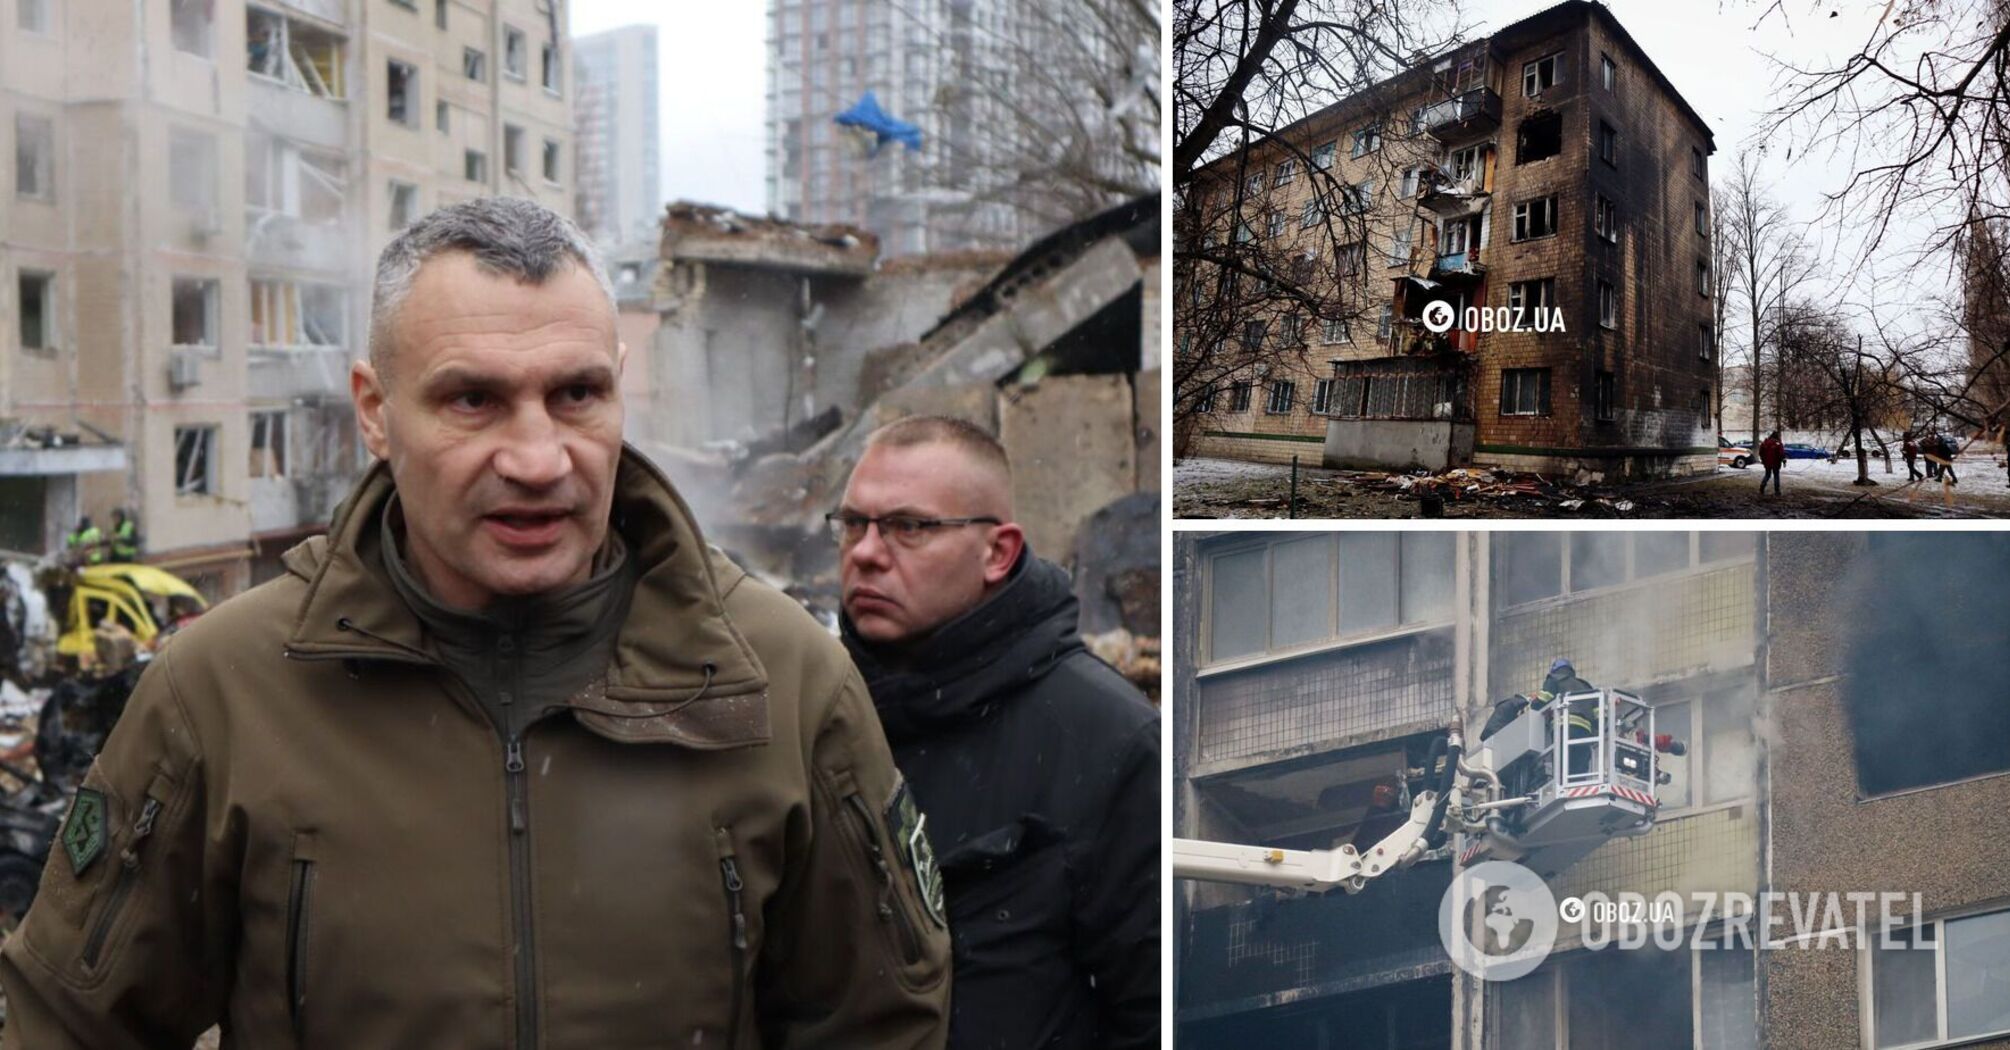 Vitaliy Klychko told how the restoration of residential buildings in Kyiv is going on